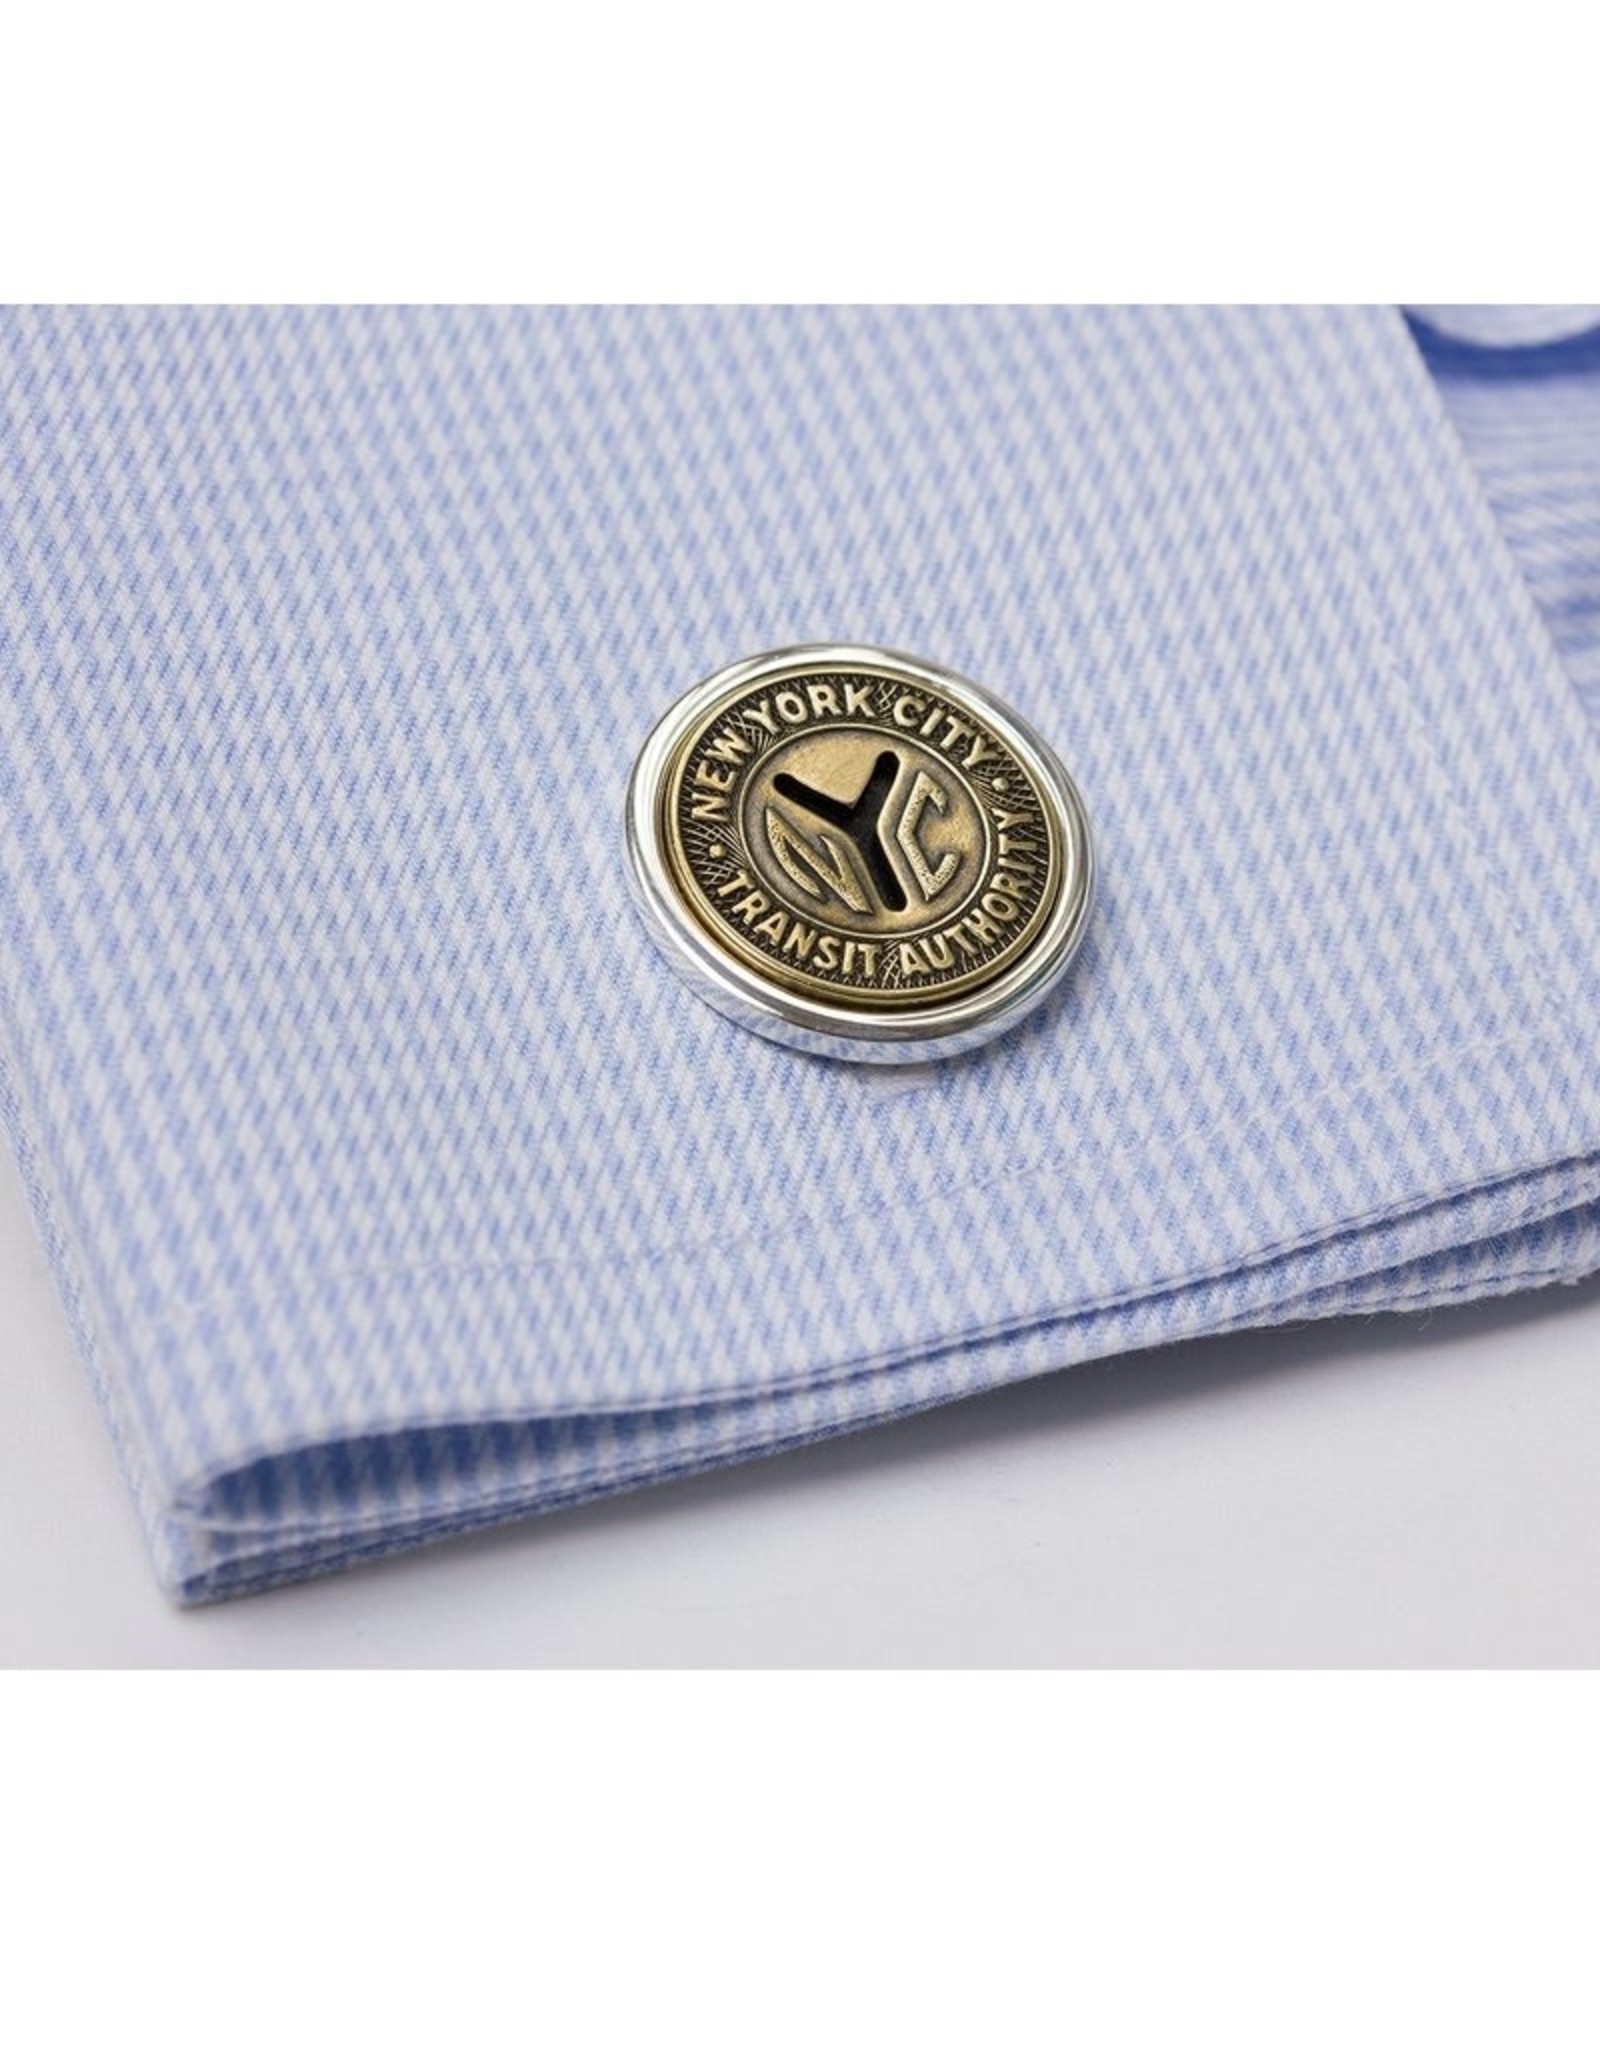 Tokens & Icons NYC Token Cuff Links